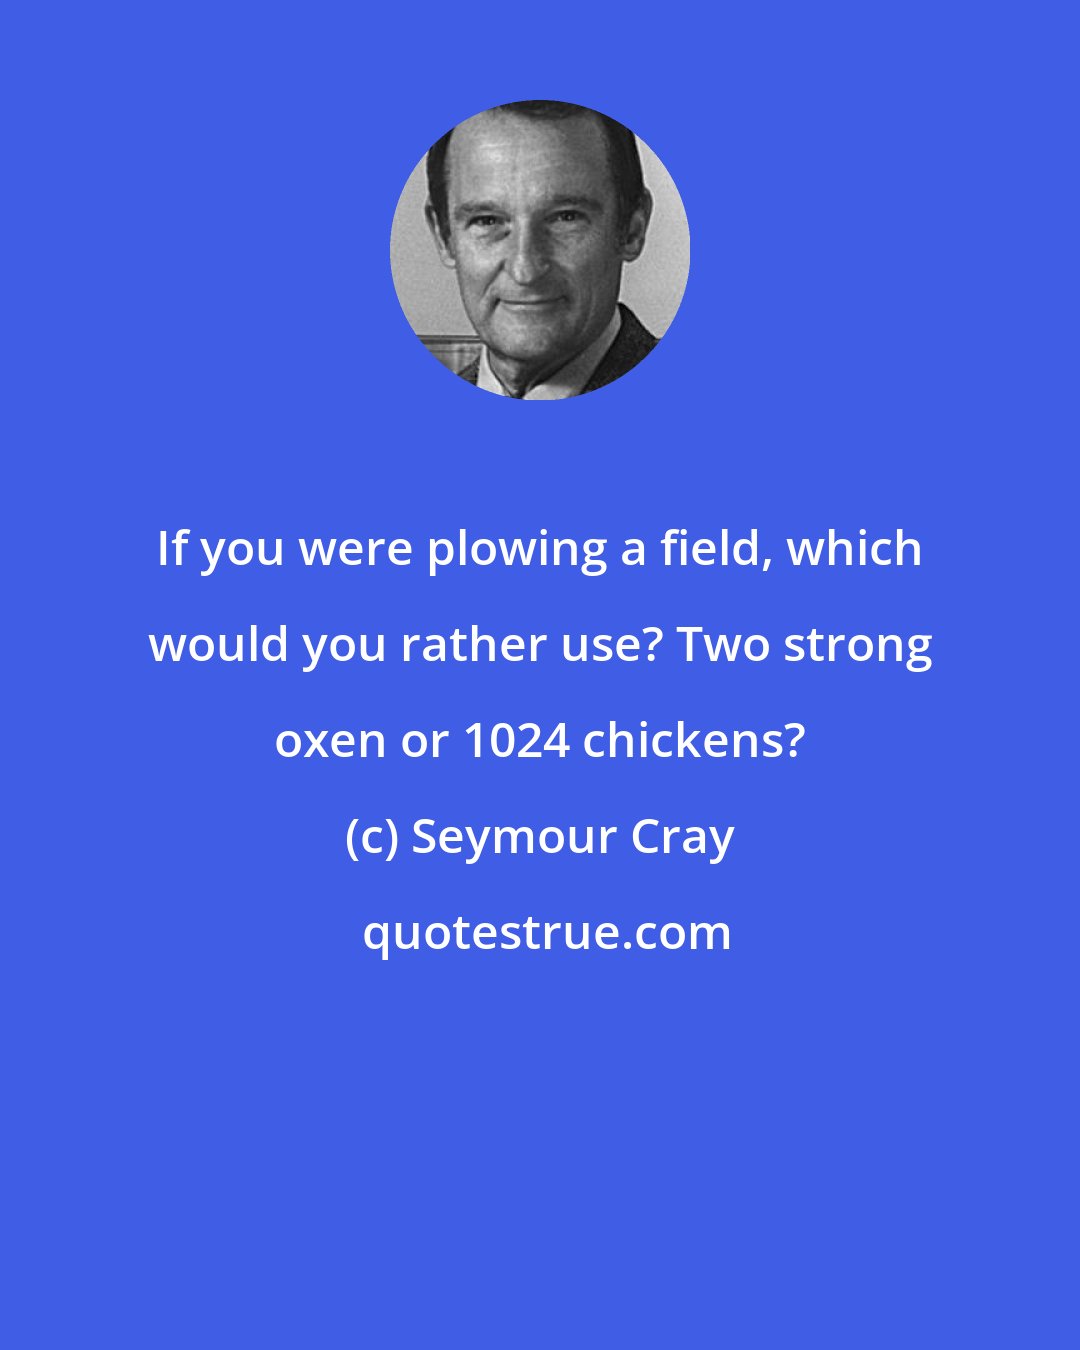 Seymour Cray: If you were plowing a field, which would you rather use? Two strong oxen or 1024 chickens?